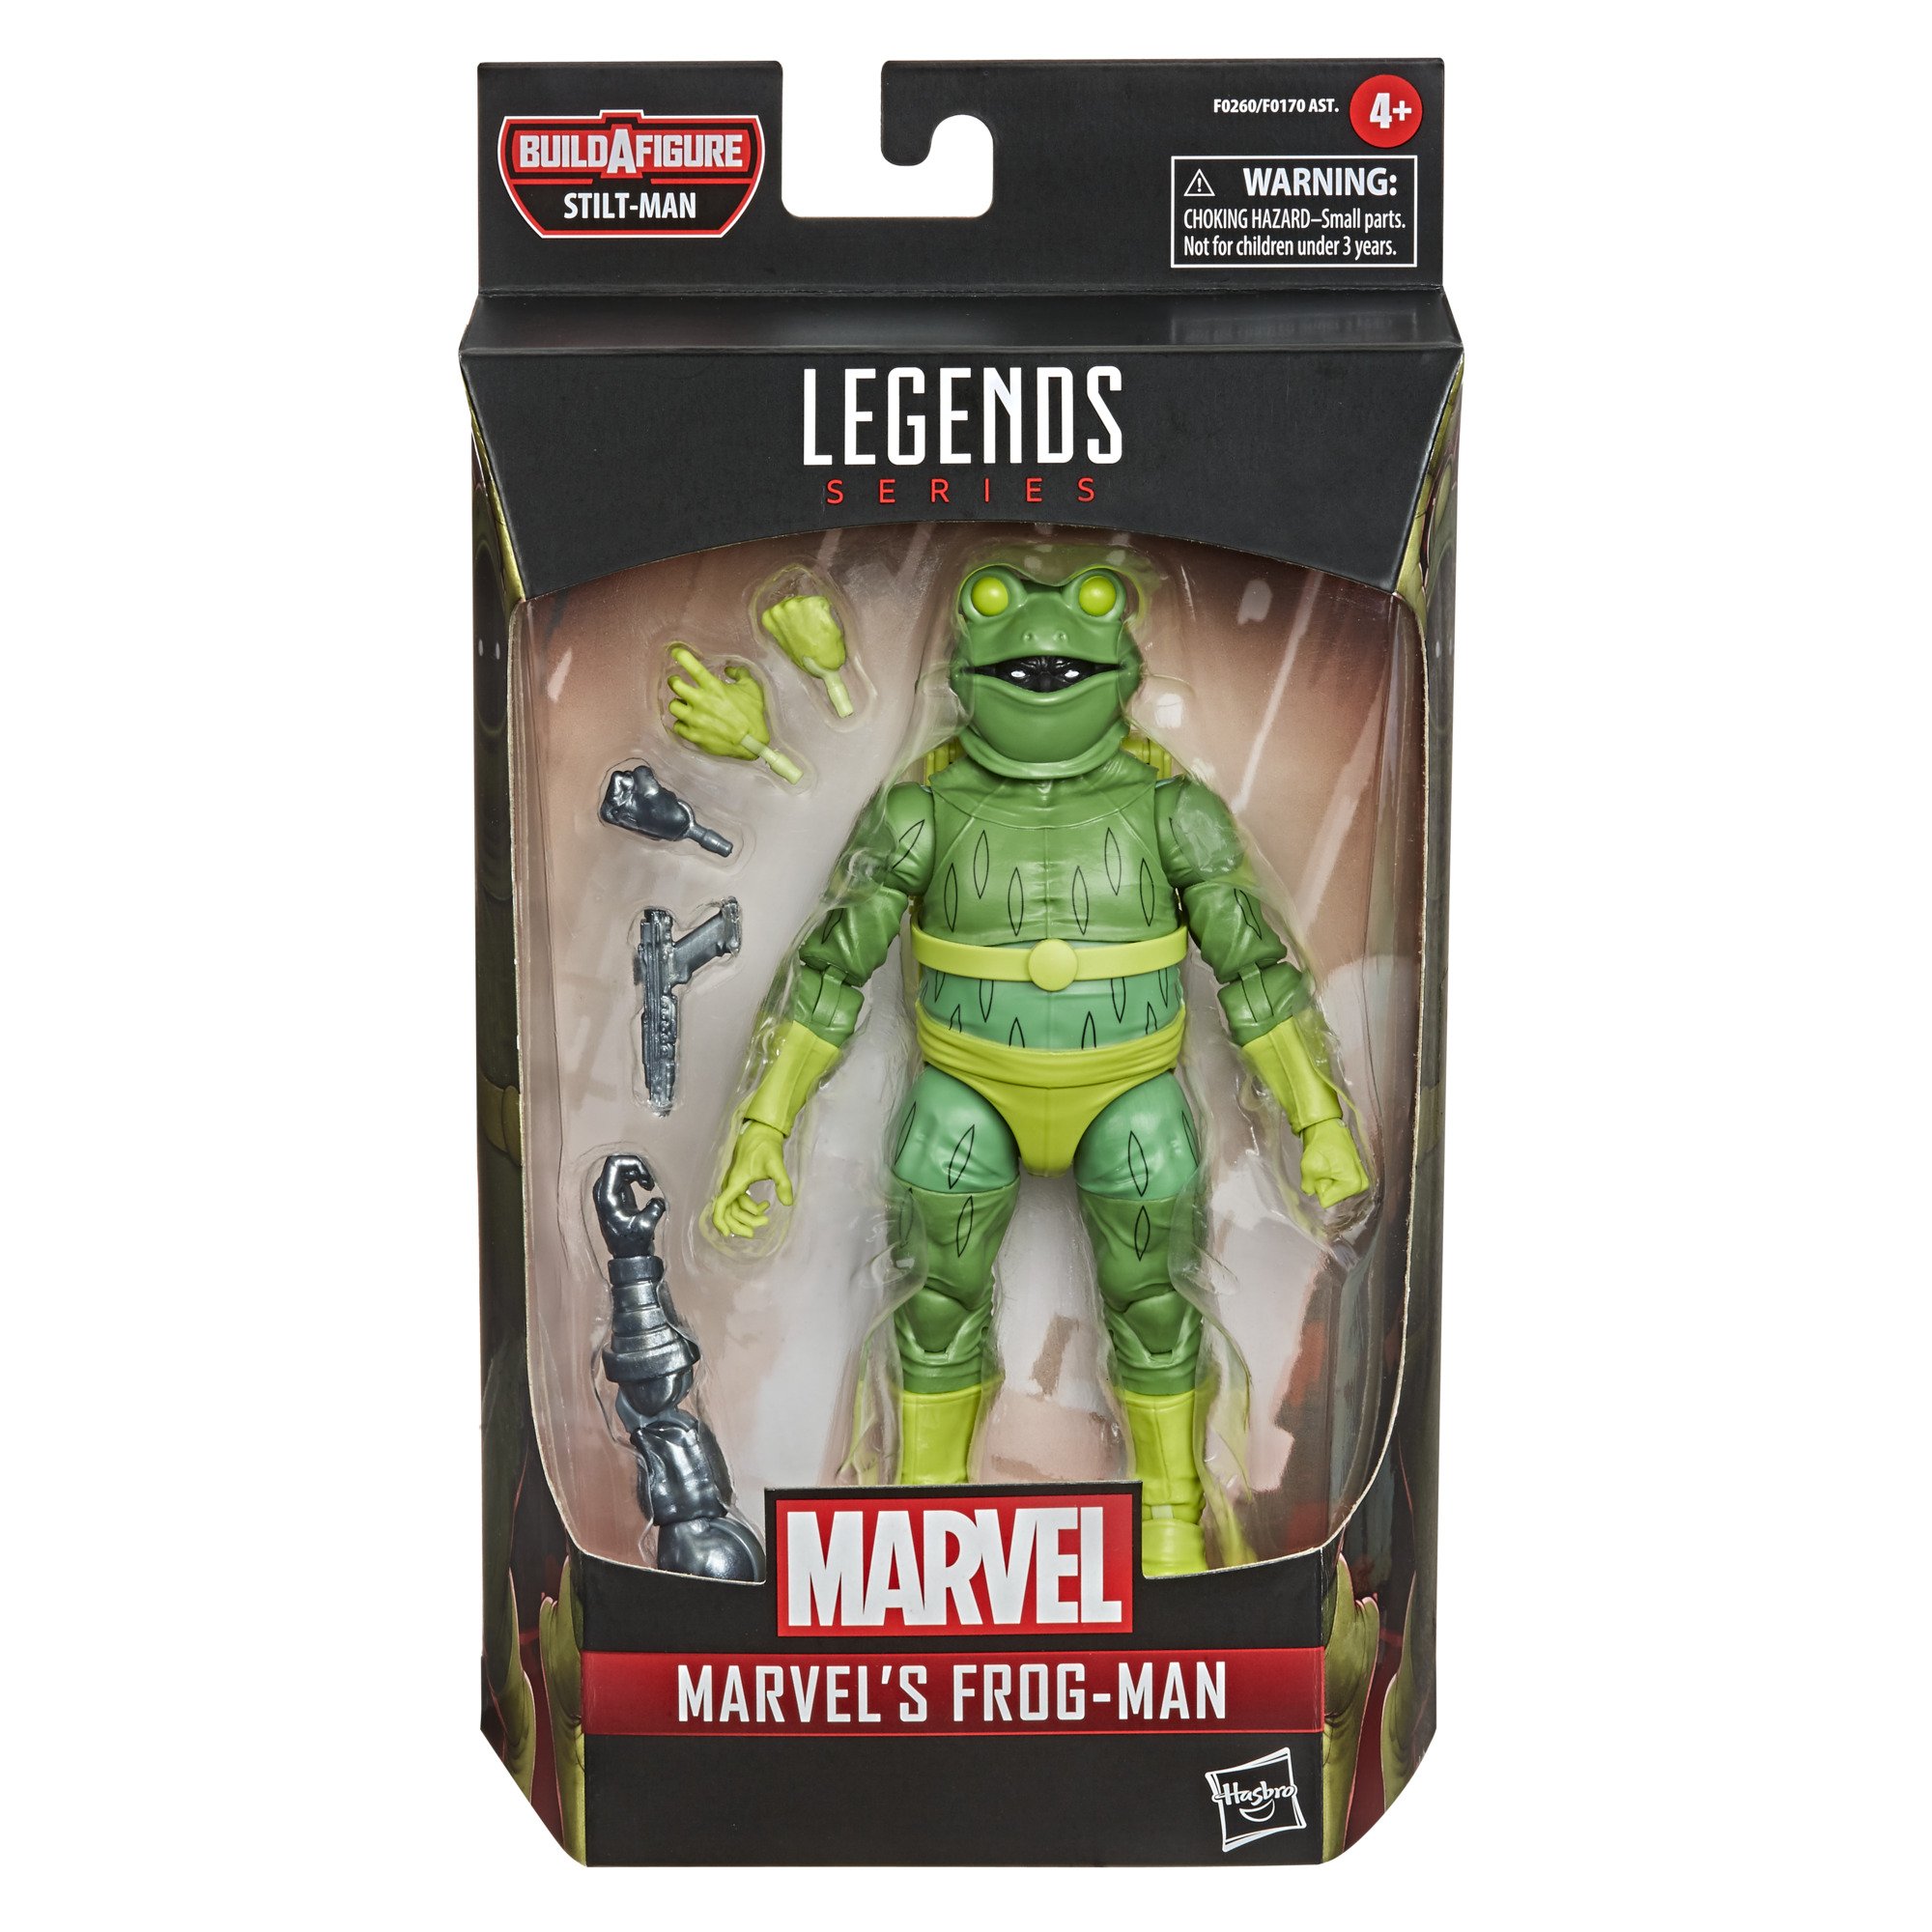 Frog-Man carded